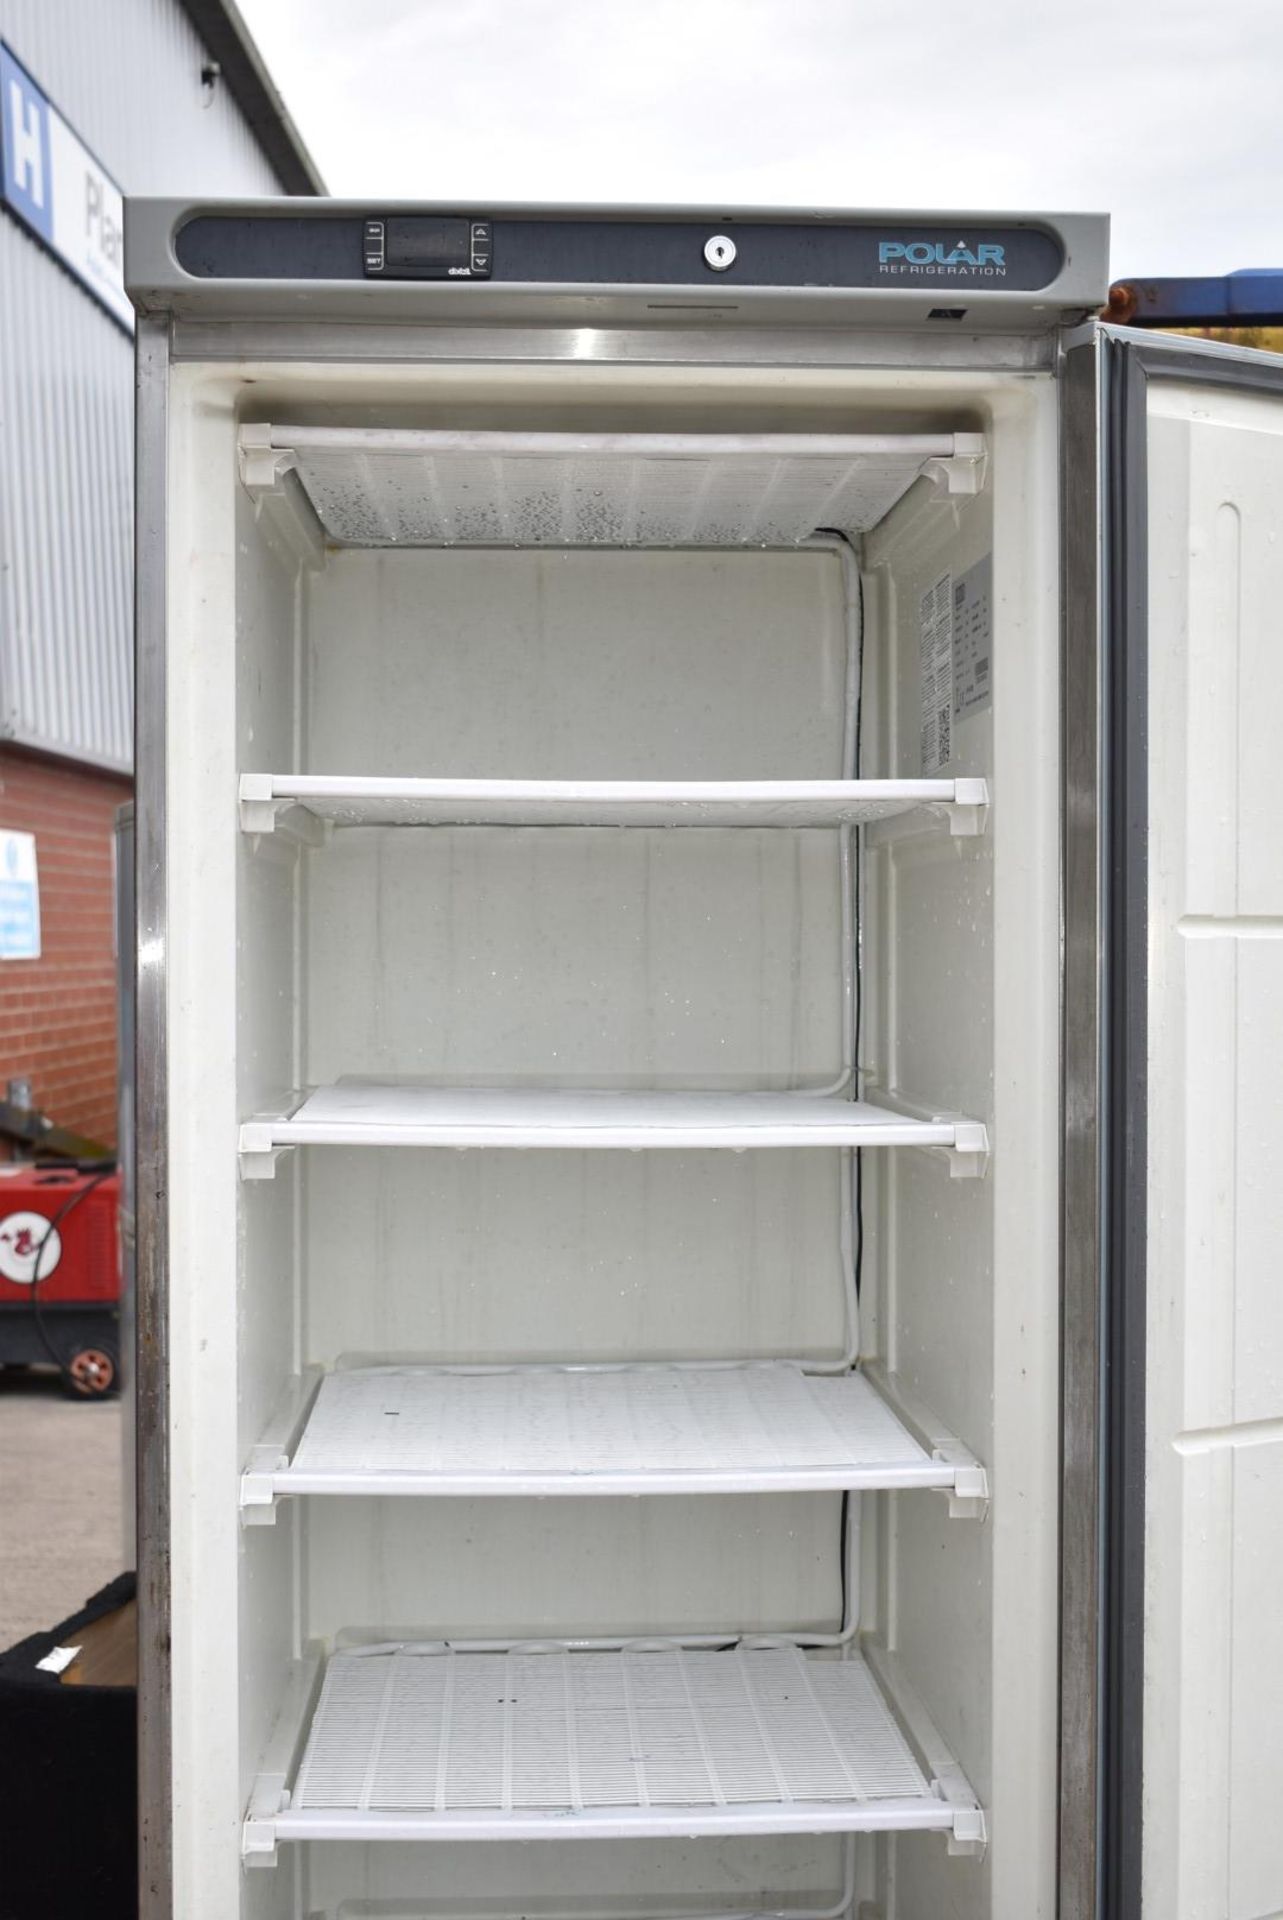 1 x Polar CD083 Upright Freezer With Stainless Steel Exterior - Dimensions: H185 x W60 x D60 cms - Image 4 of 10